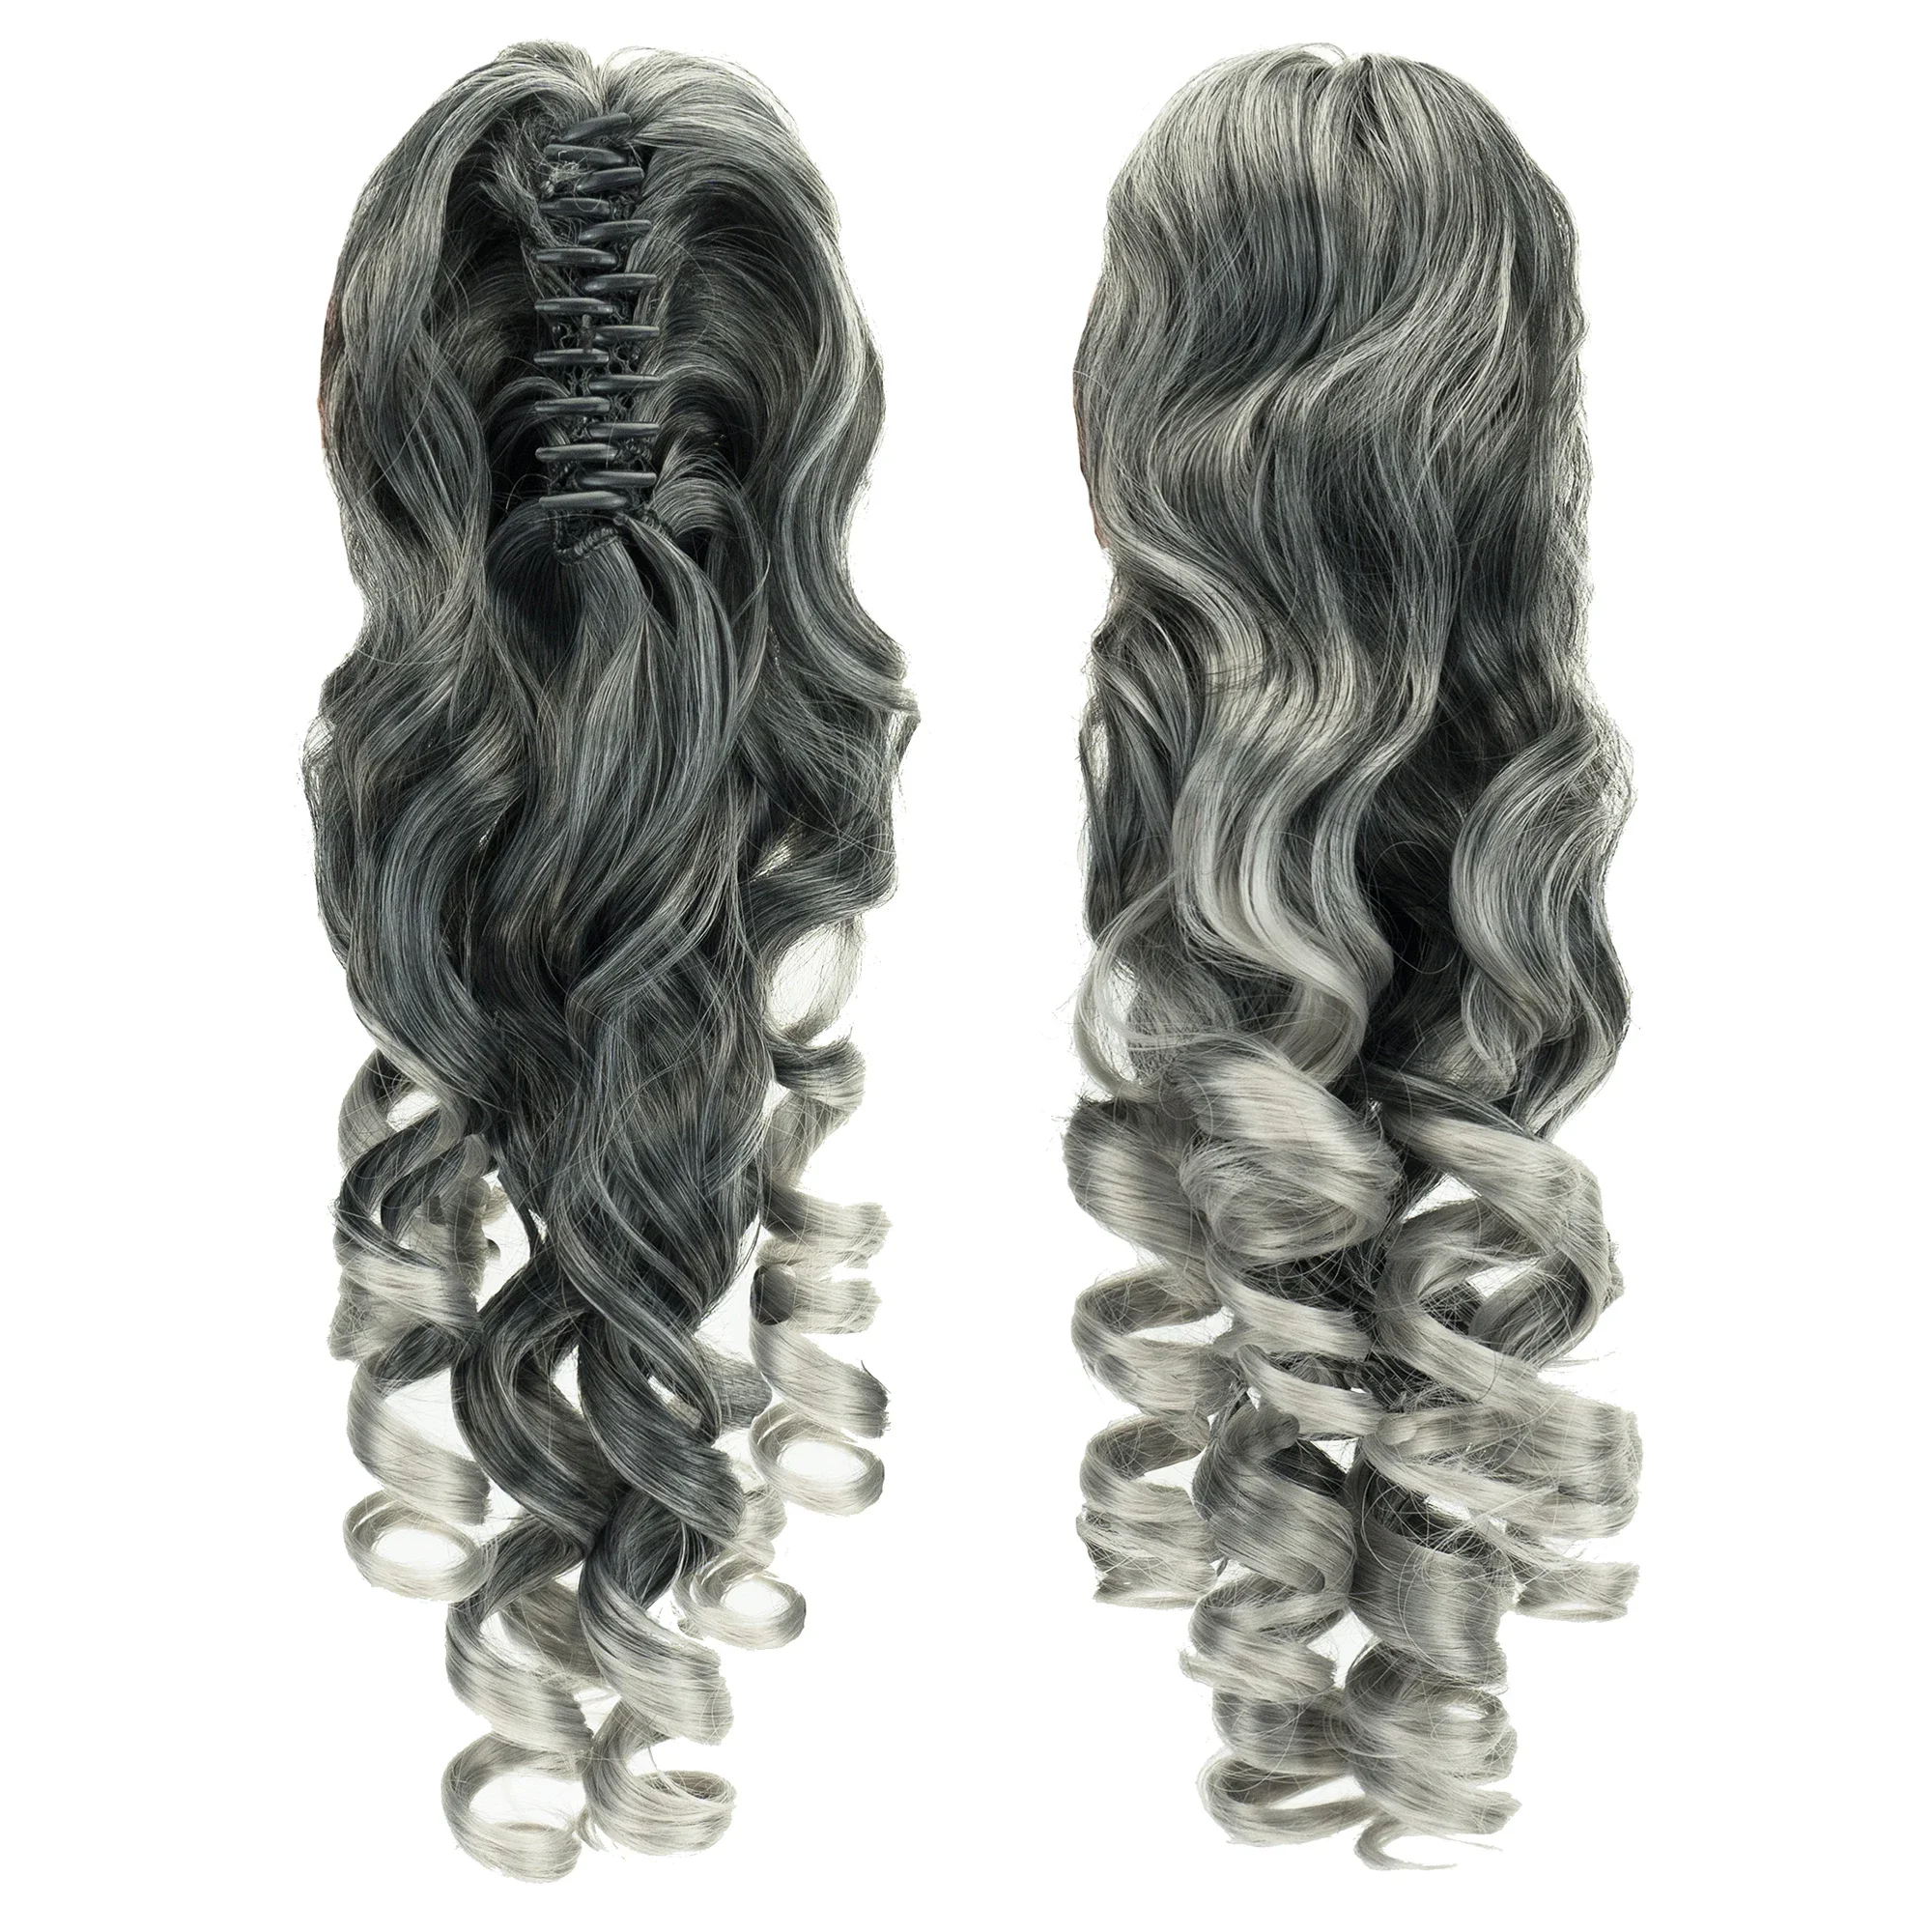 

Ombre Grey Curly Clip in Ponytails Hairpieces Claw Headwear Fake Pony Tail Hair Extensions Postiche Queue De Cheval